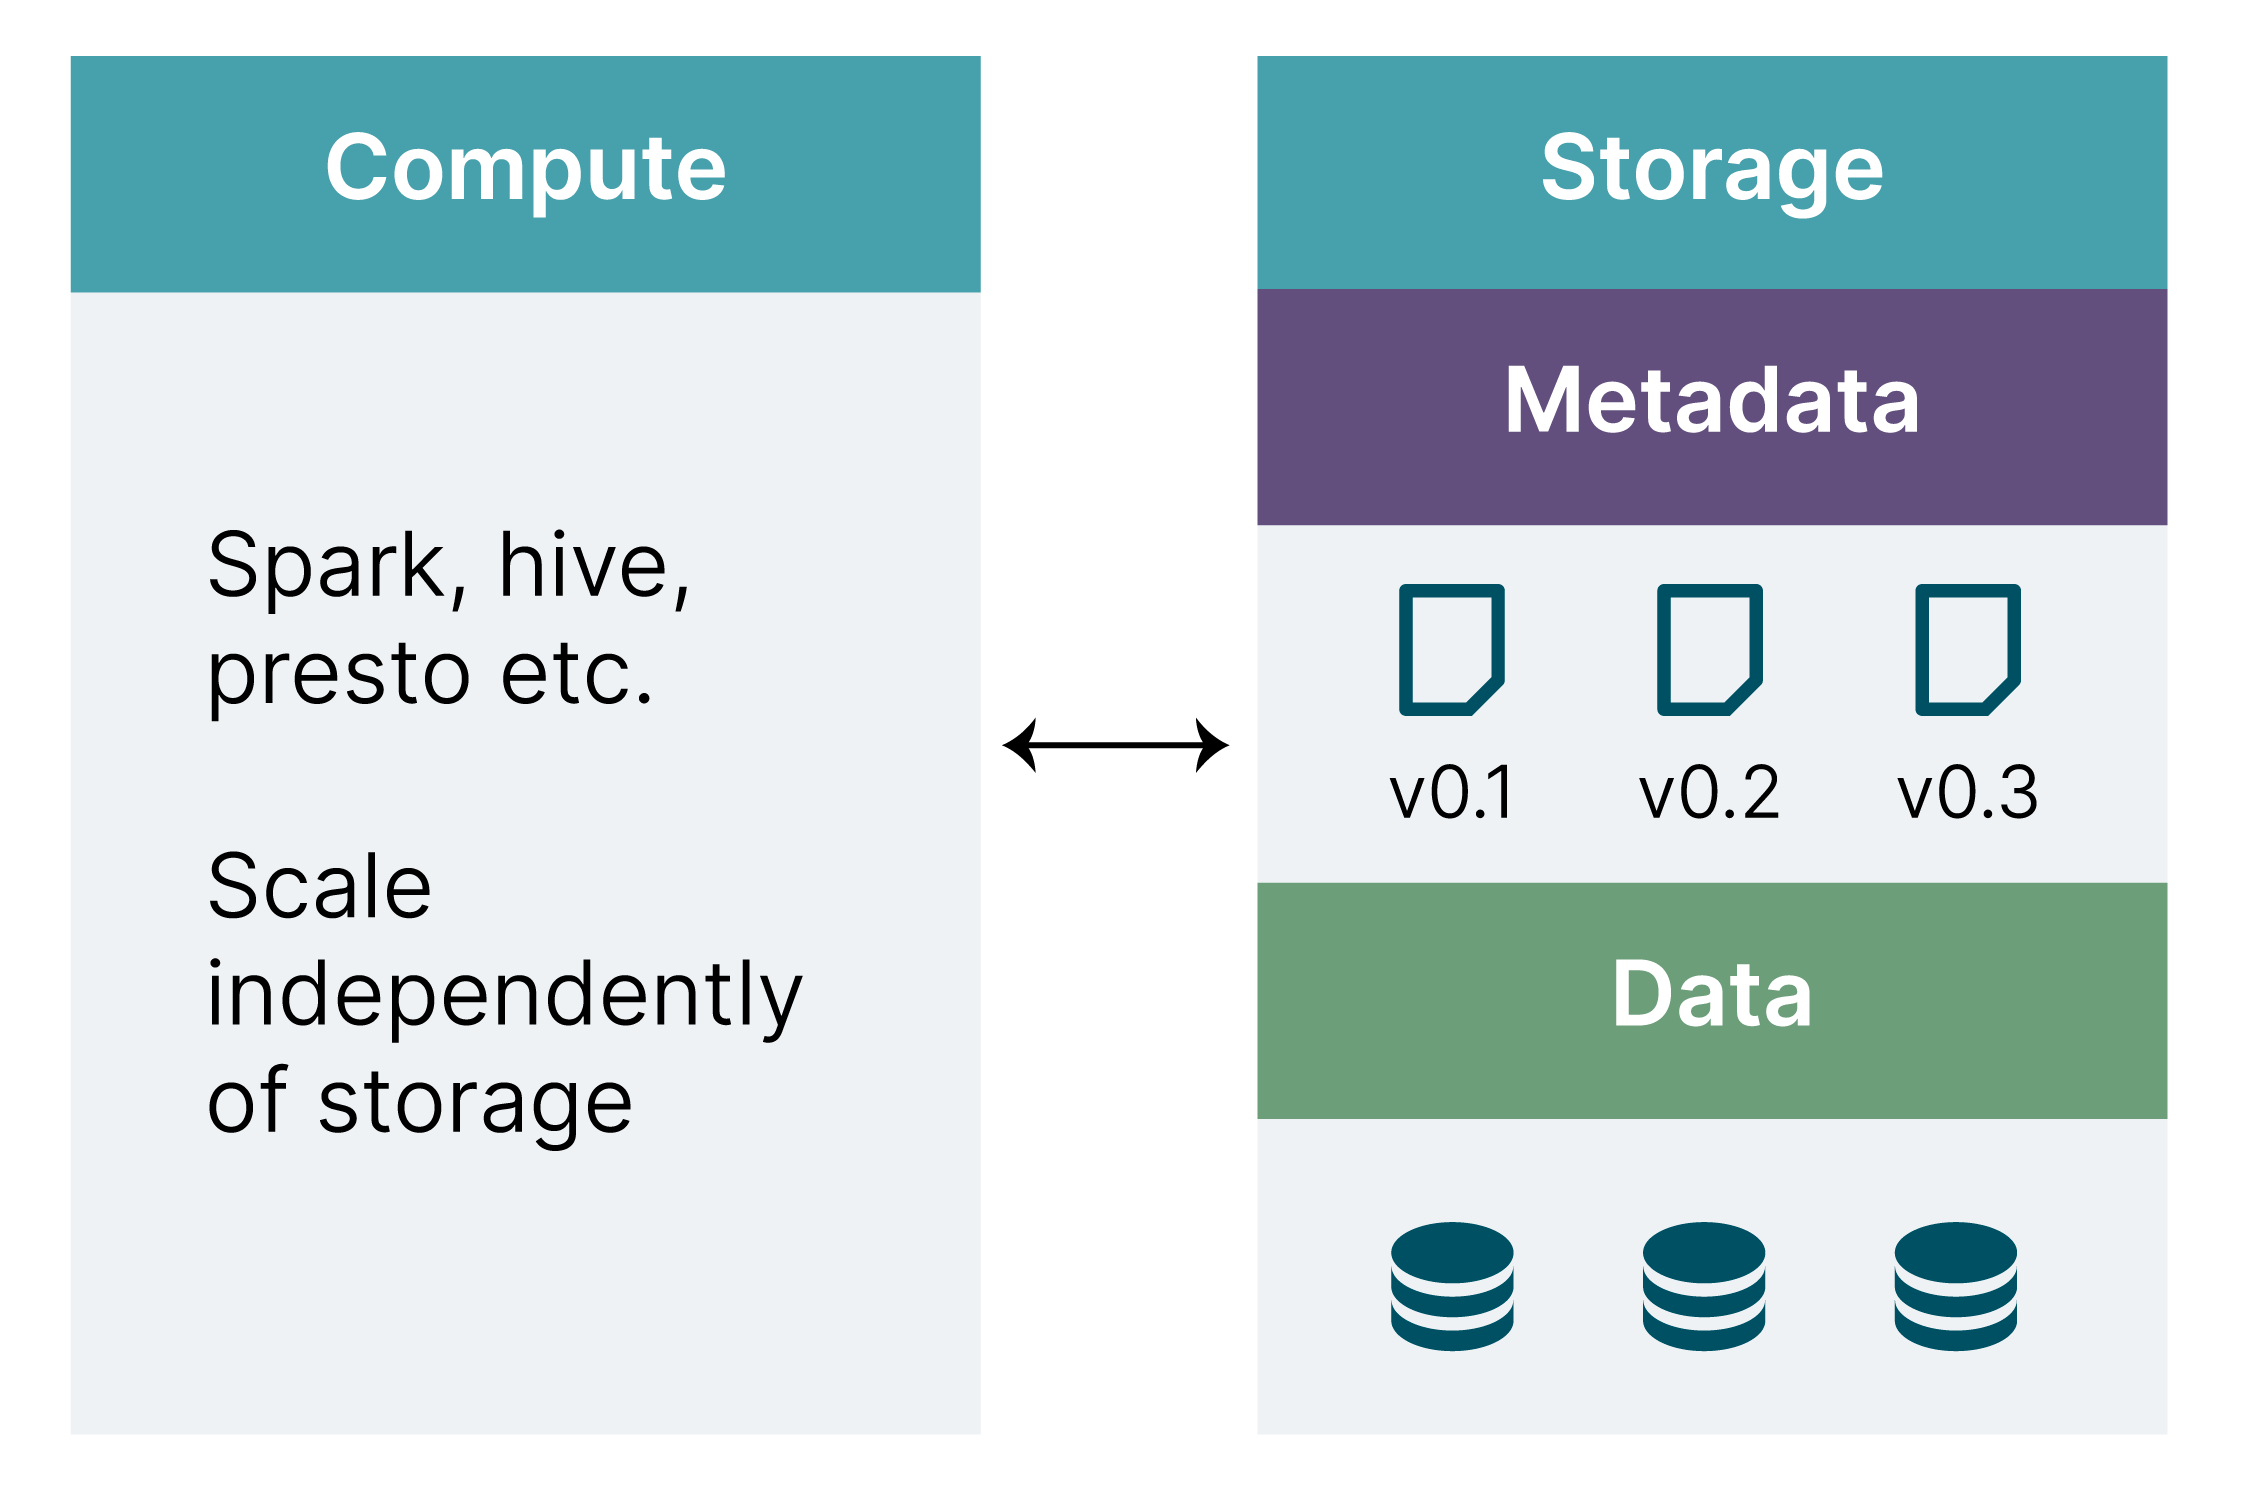 Illustration of a data lake model. Two tables illustrate the idea of keeping processing engines - compute (left table) - and underlying storage (right table) separate while keeping metadata close to storage.